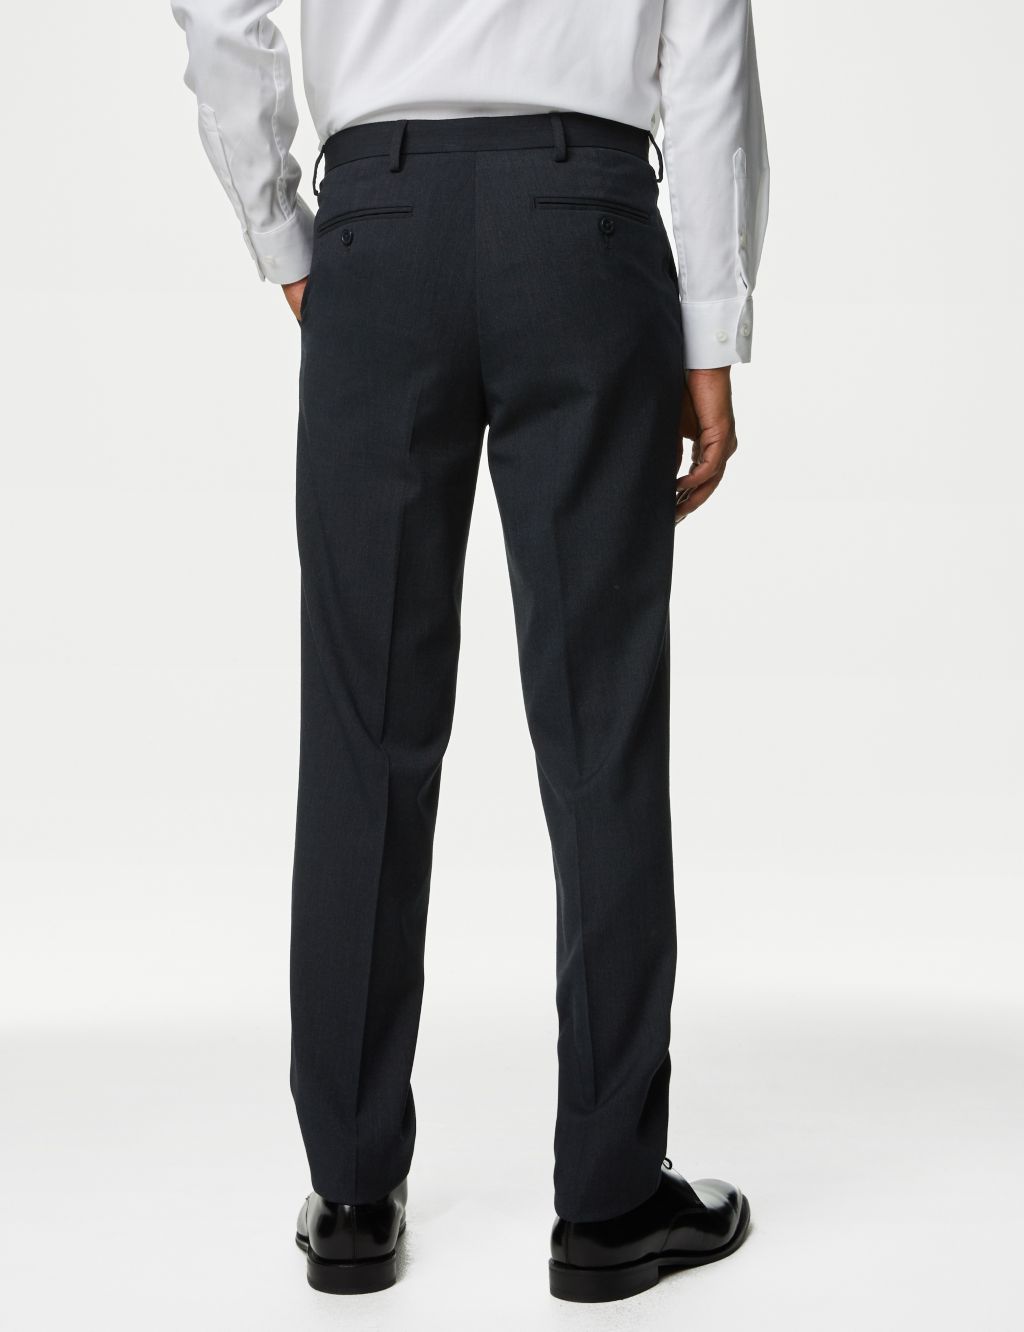 Slim Fit Flat Front Stretch Trousers image 5